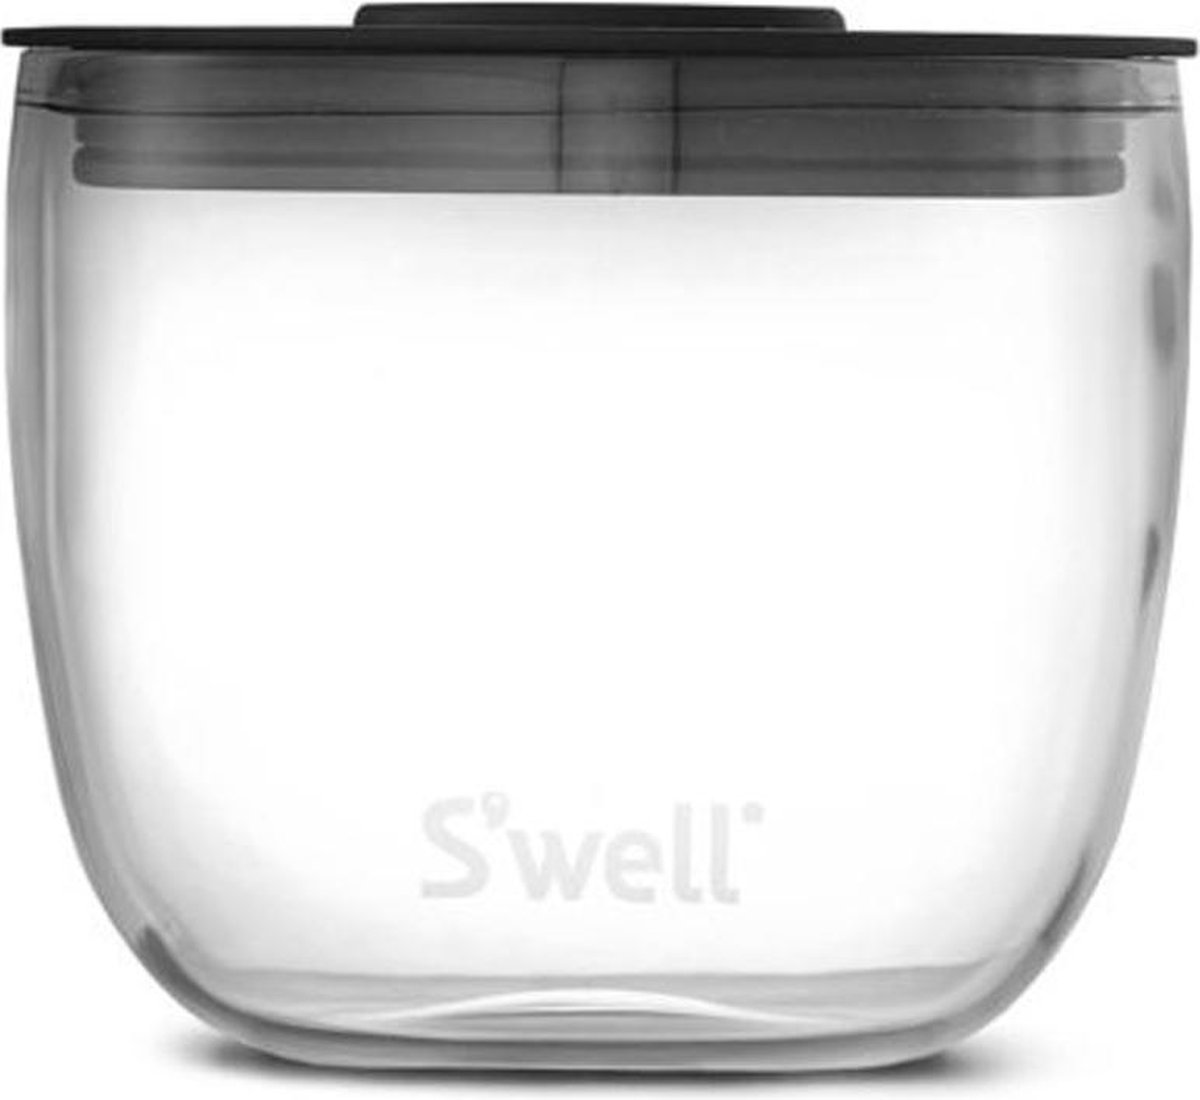 S'well Eats Prep Bowl for Foodbowl 295 ml